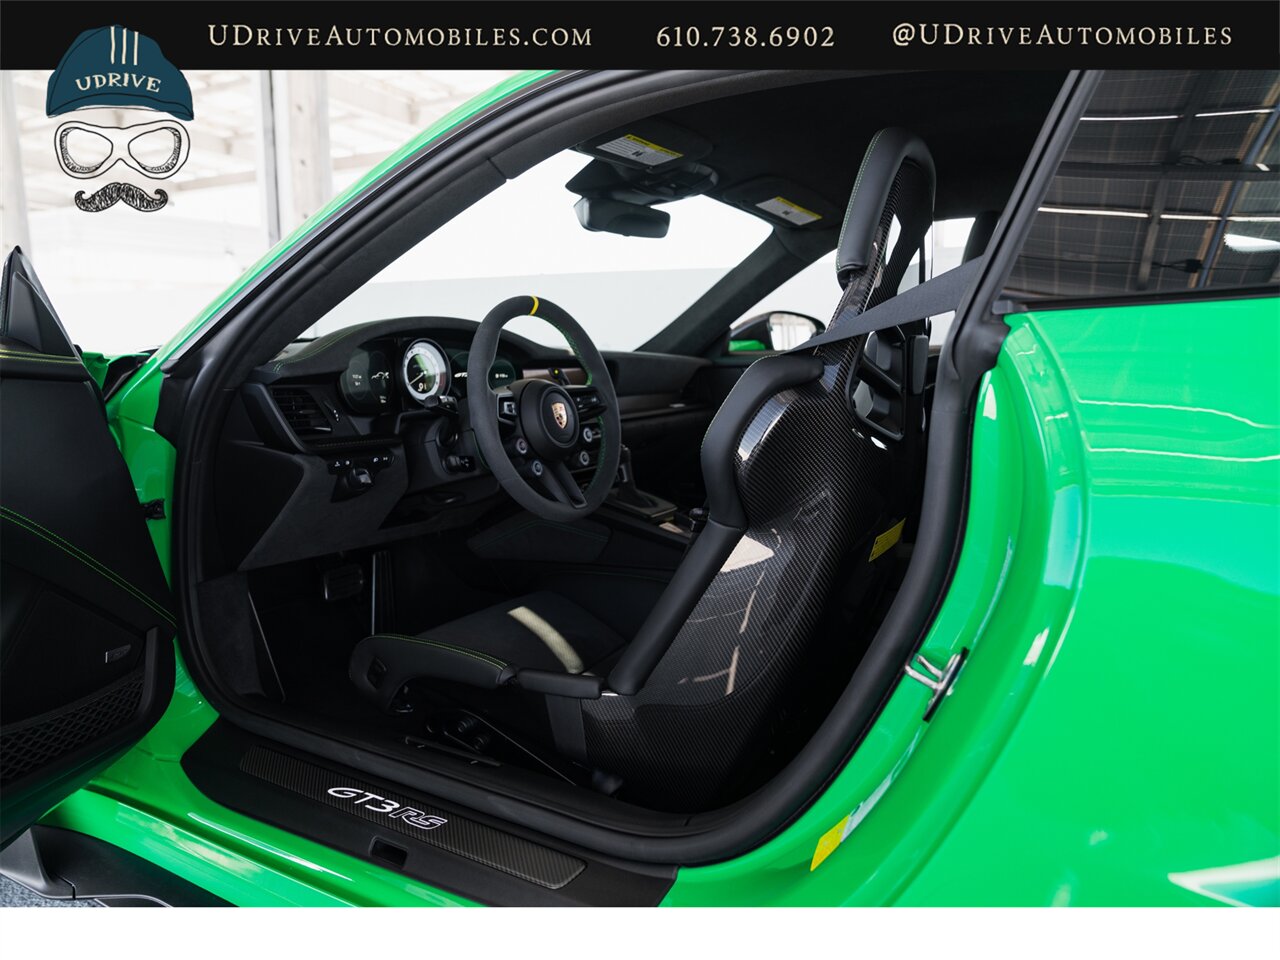 2023 Porsche 911 GT3 RS  Weissach Pkg FAL Full Body PPF $43k in Extras - Photo 65 - West Chester, PA 19382